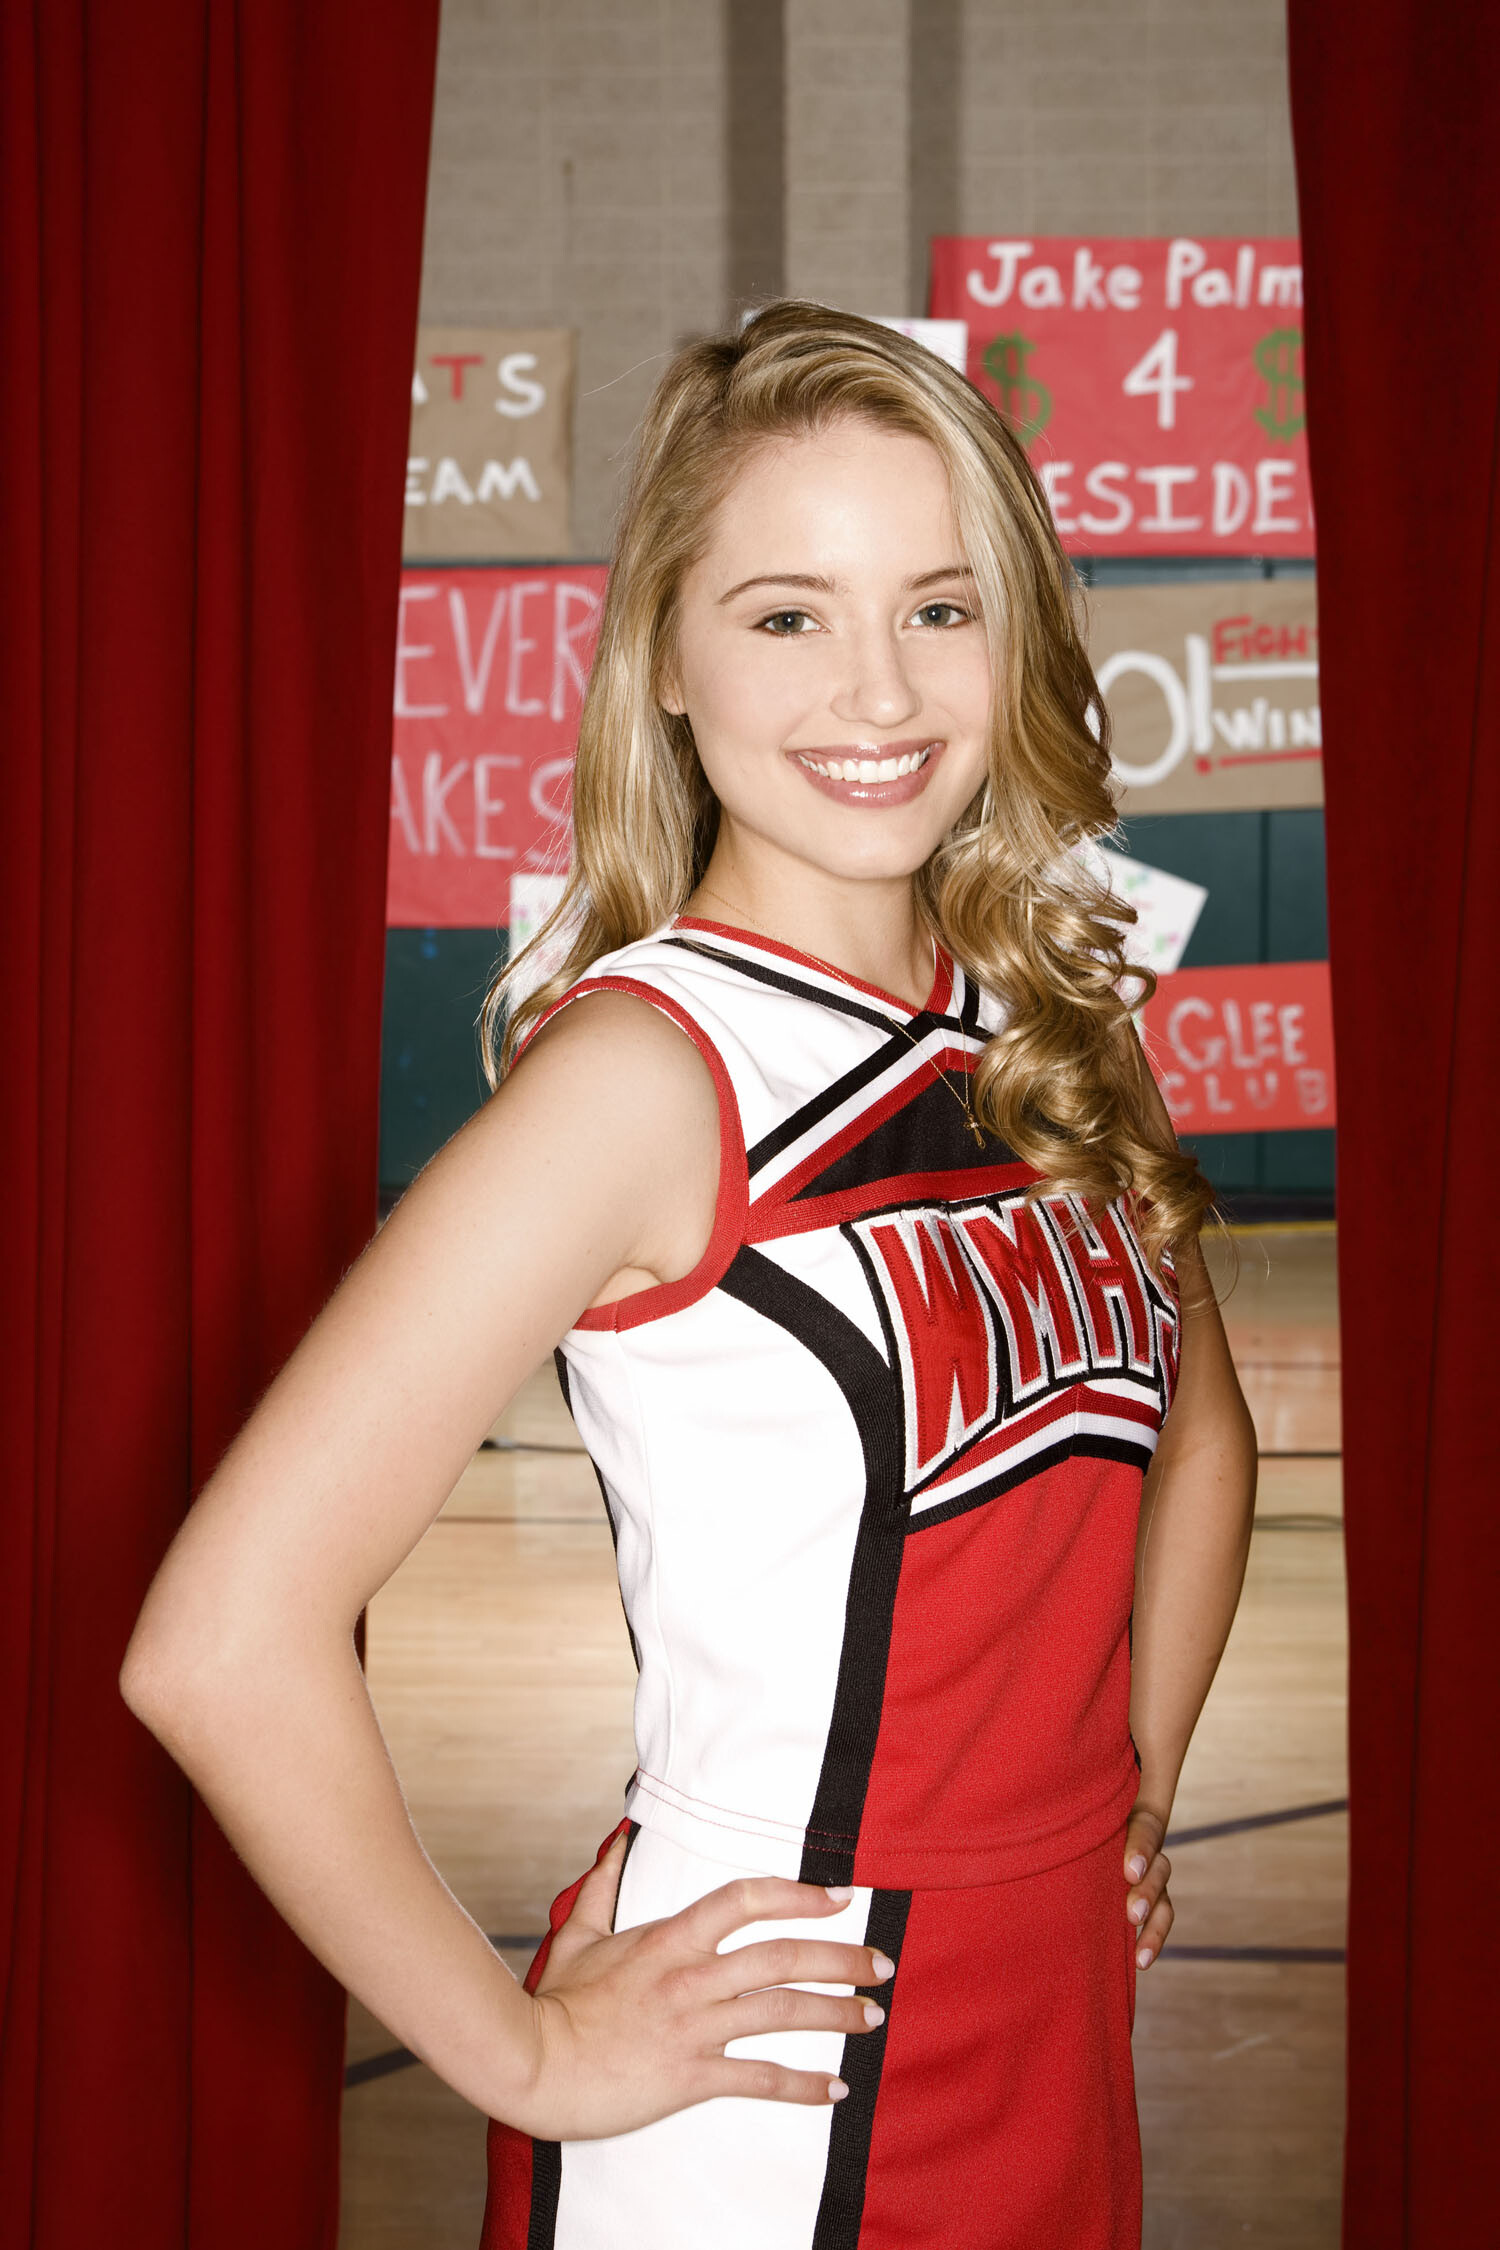 Glee (TV series): Dianna Agron as Quinn Fabray, The cheerleading captain at the William McKinley High School. 1500x2250 HD Wallpaper.